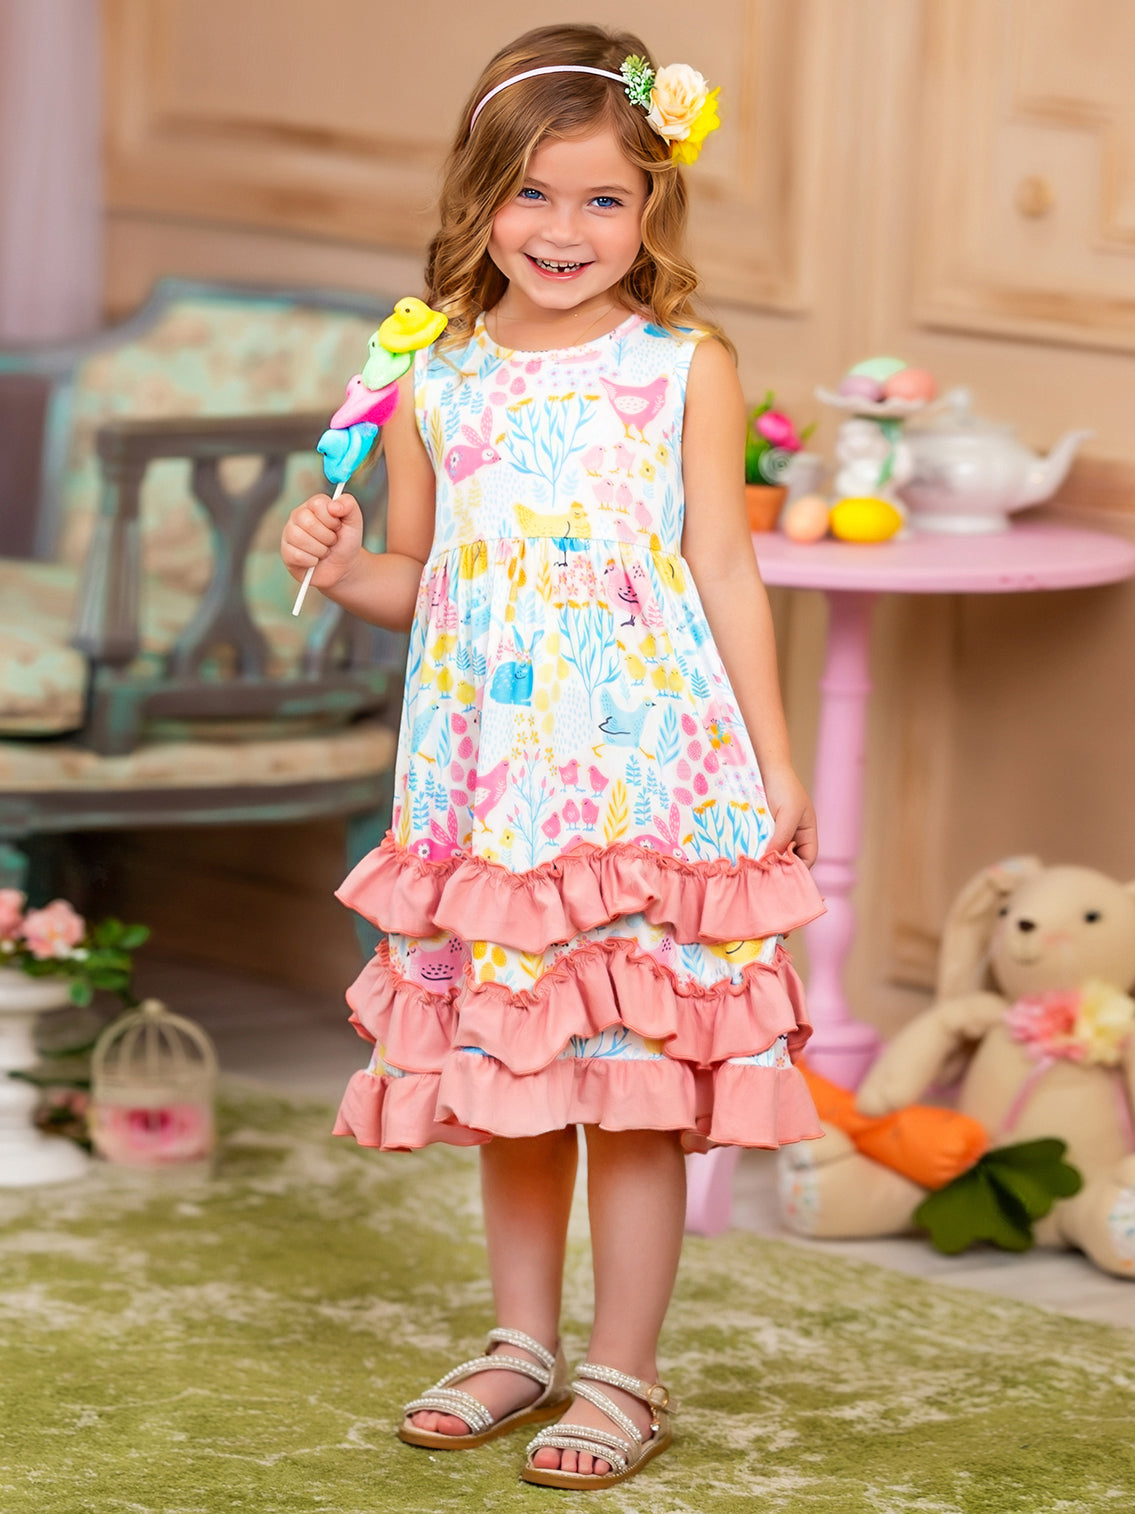 Casual dress features a tiered ruffled hem and a print that features animals (rabbits and chickens), florals, and leaves